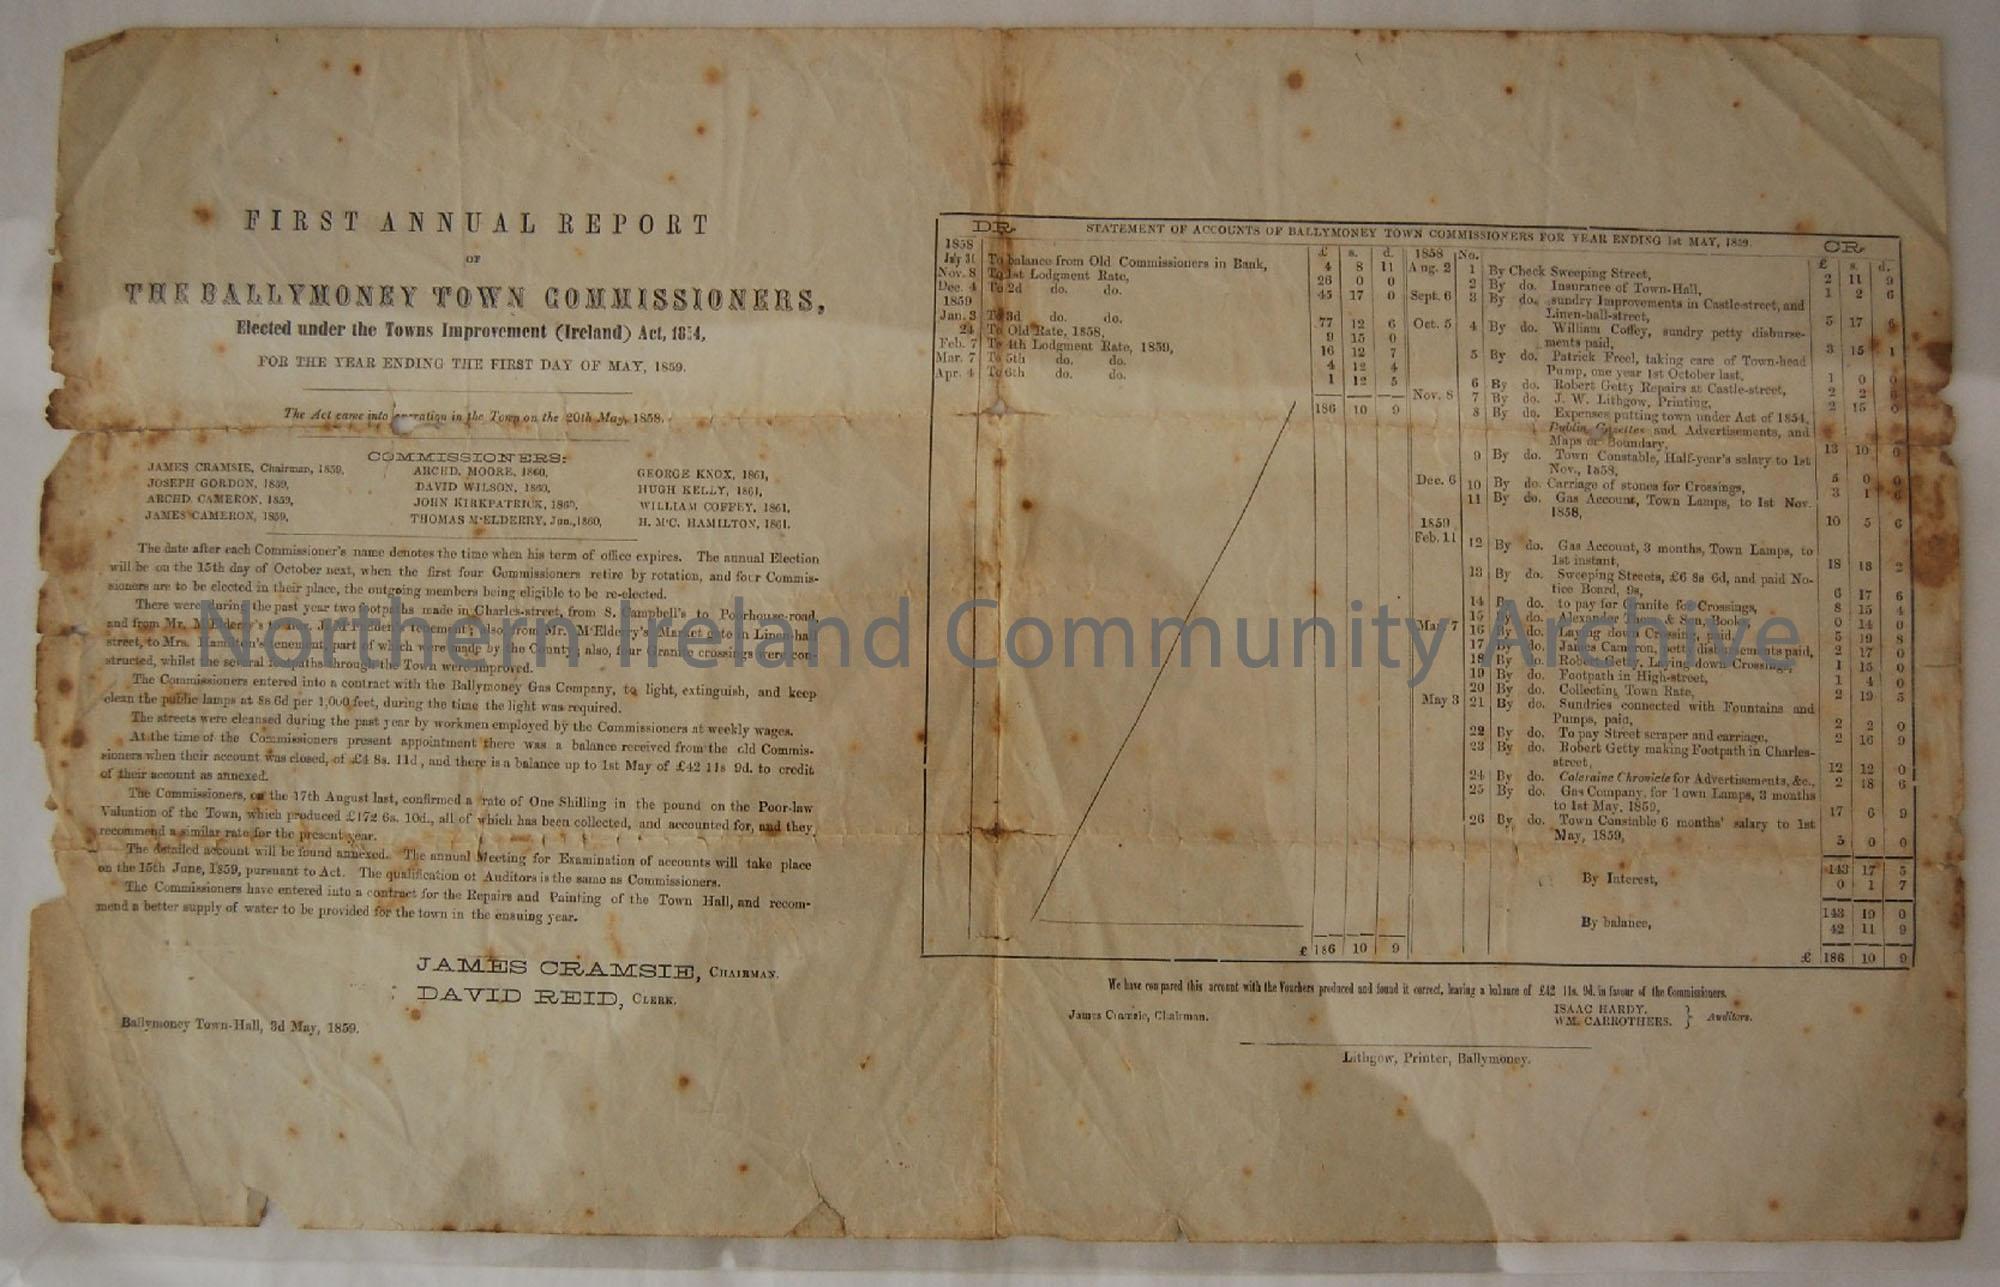 First annual report of the Ballymoney Town Commissioners, for the year ending 1st May 1859. folded out double spread. Includes statement of accounts